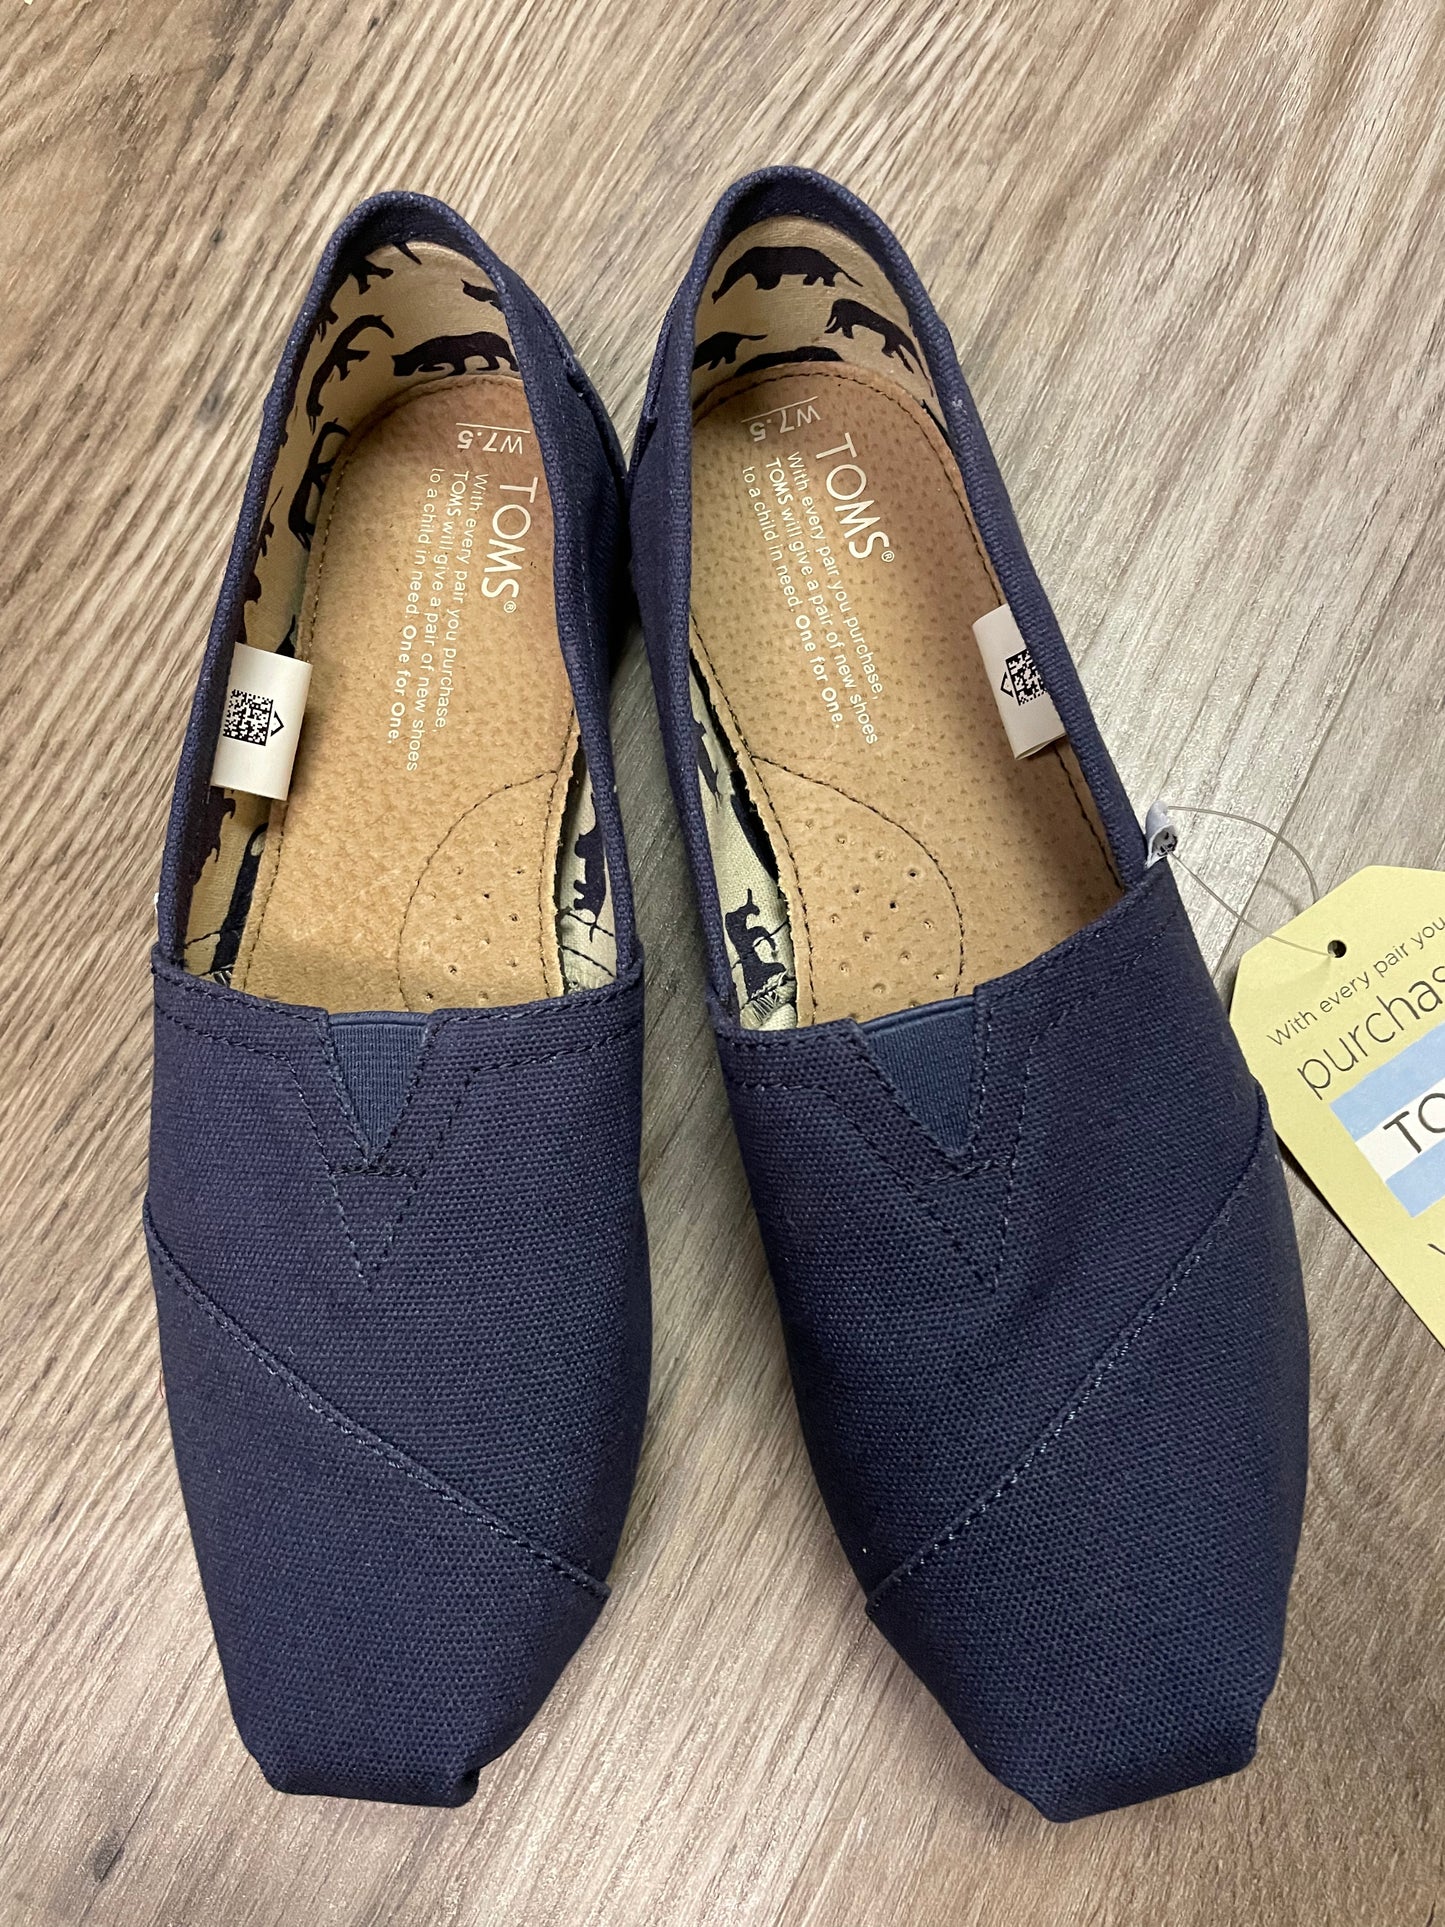 New Women 7.5 Toms classic navy canvas